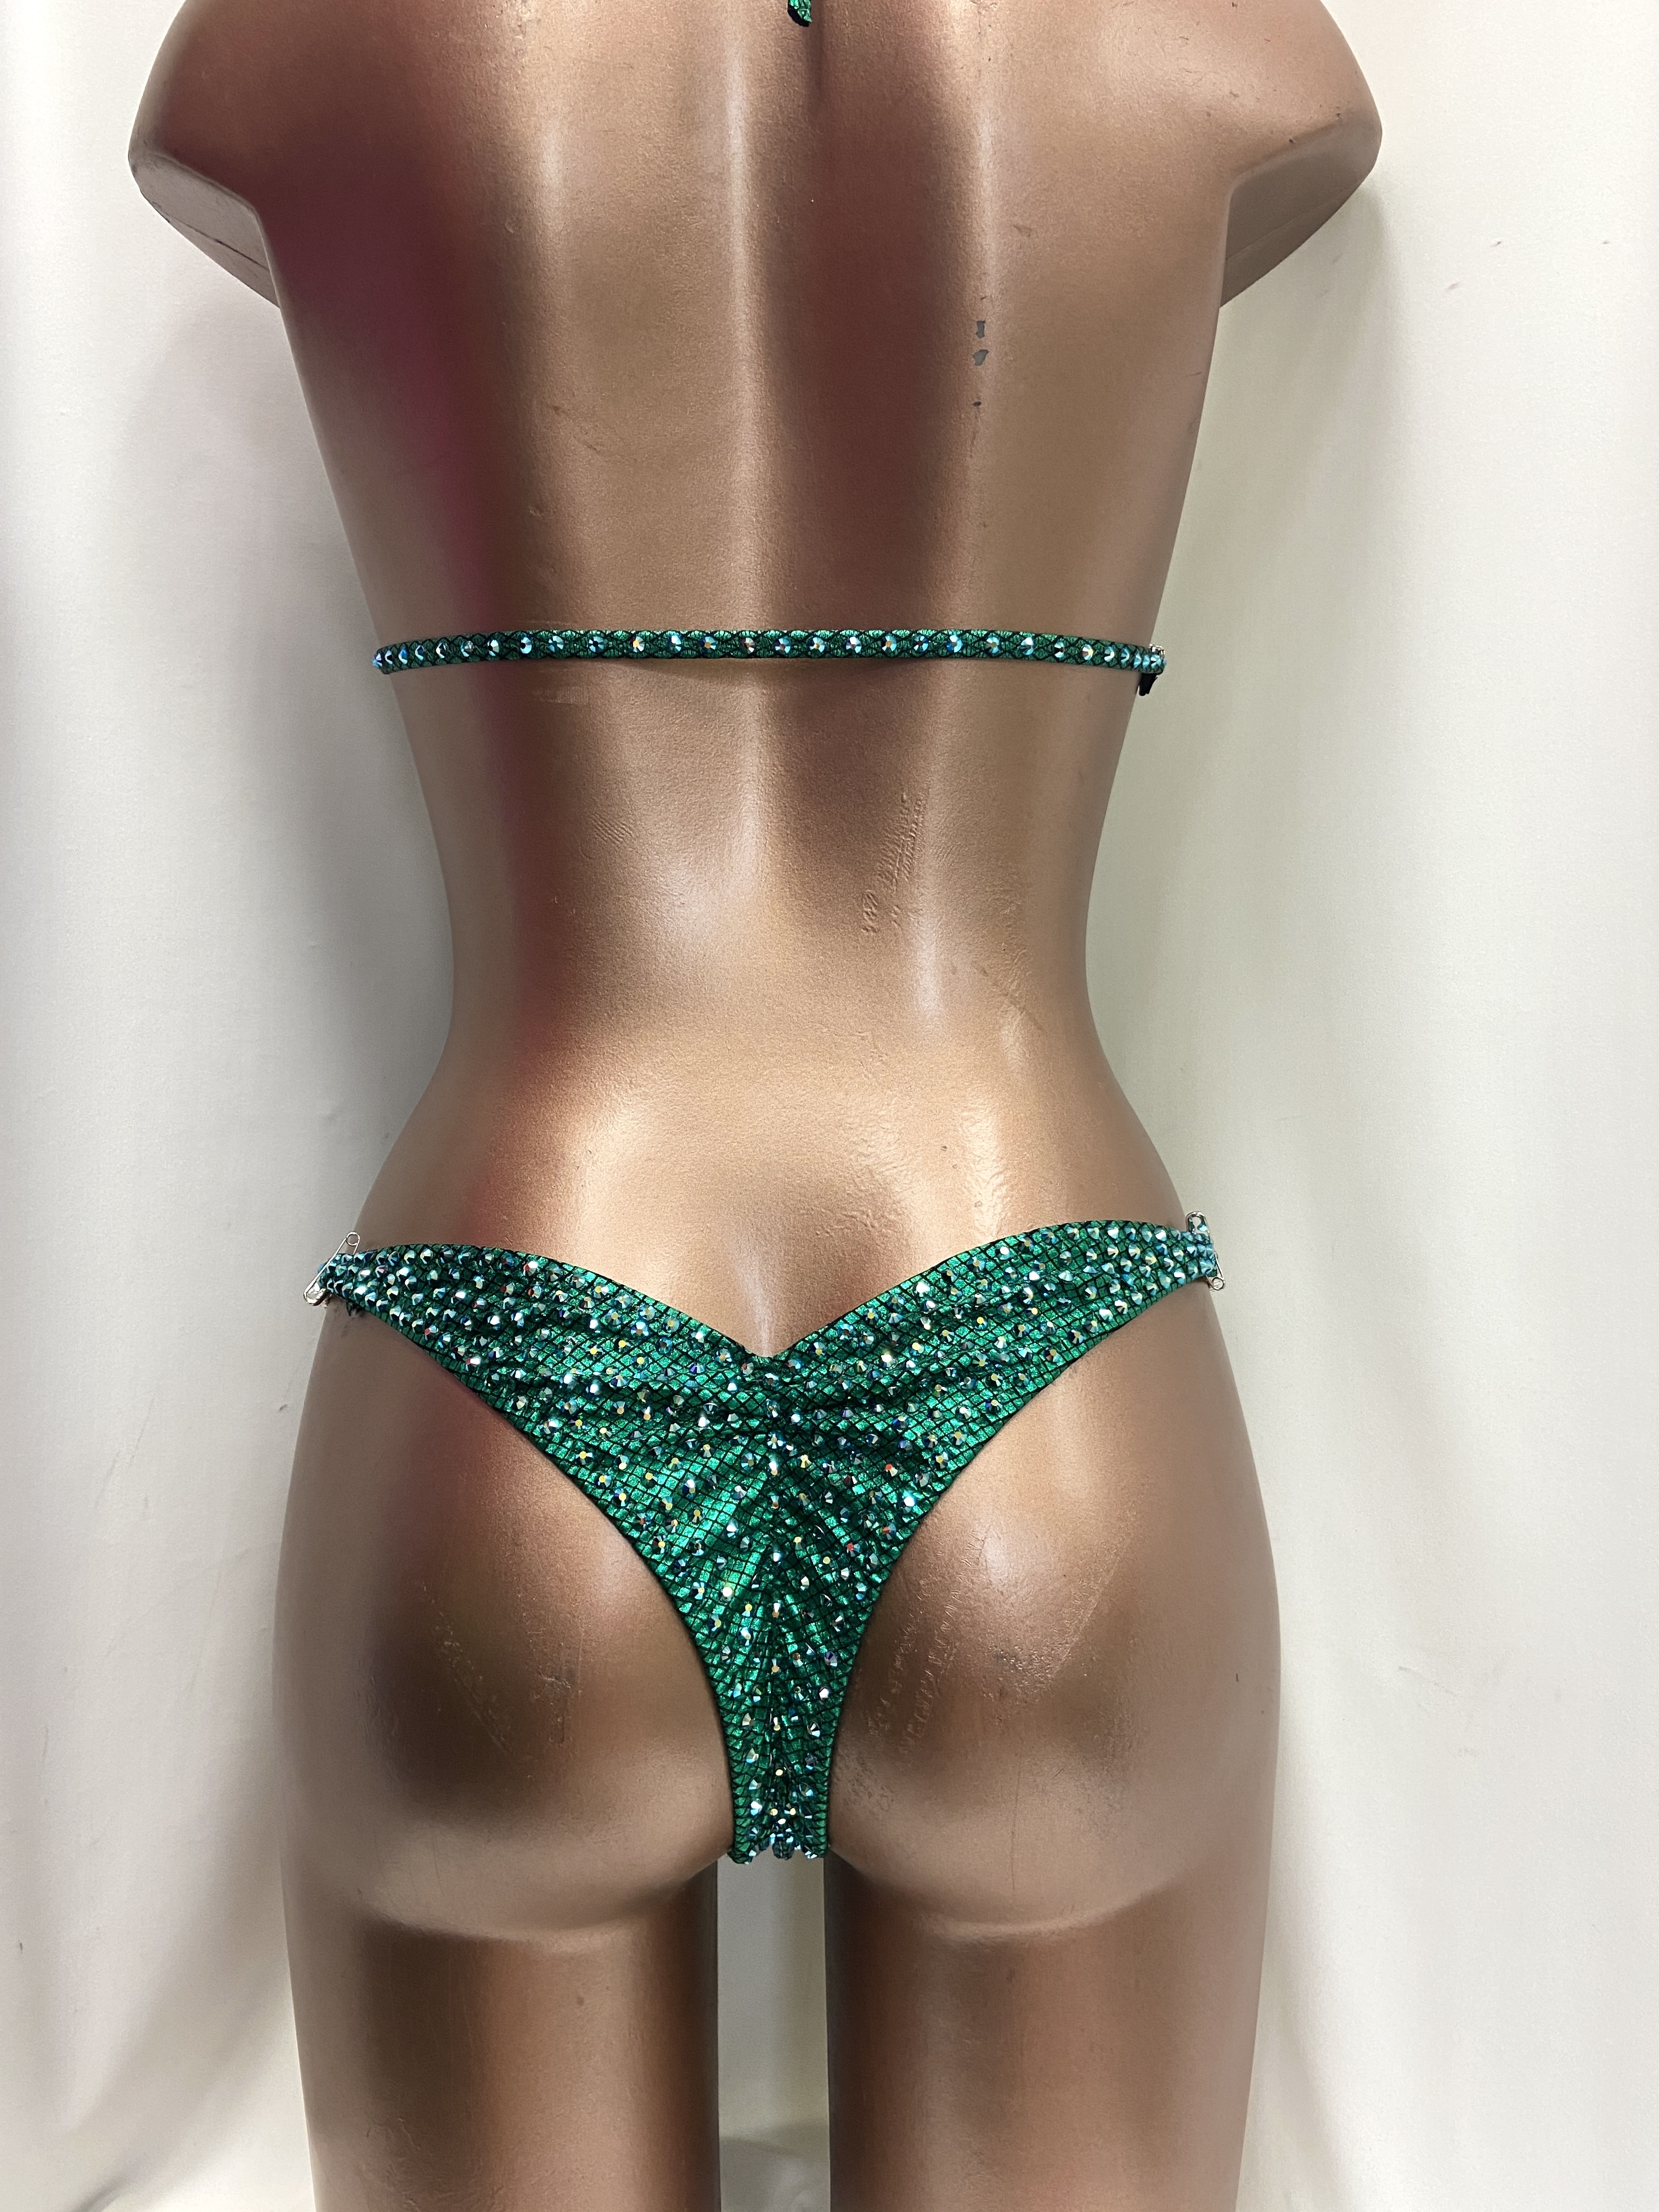 Green square hologram
emerald ab rhinestones  1/4" apart
$650 with connectors shown